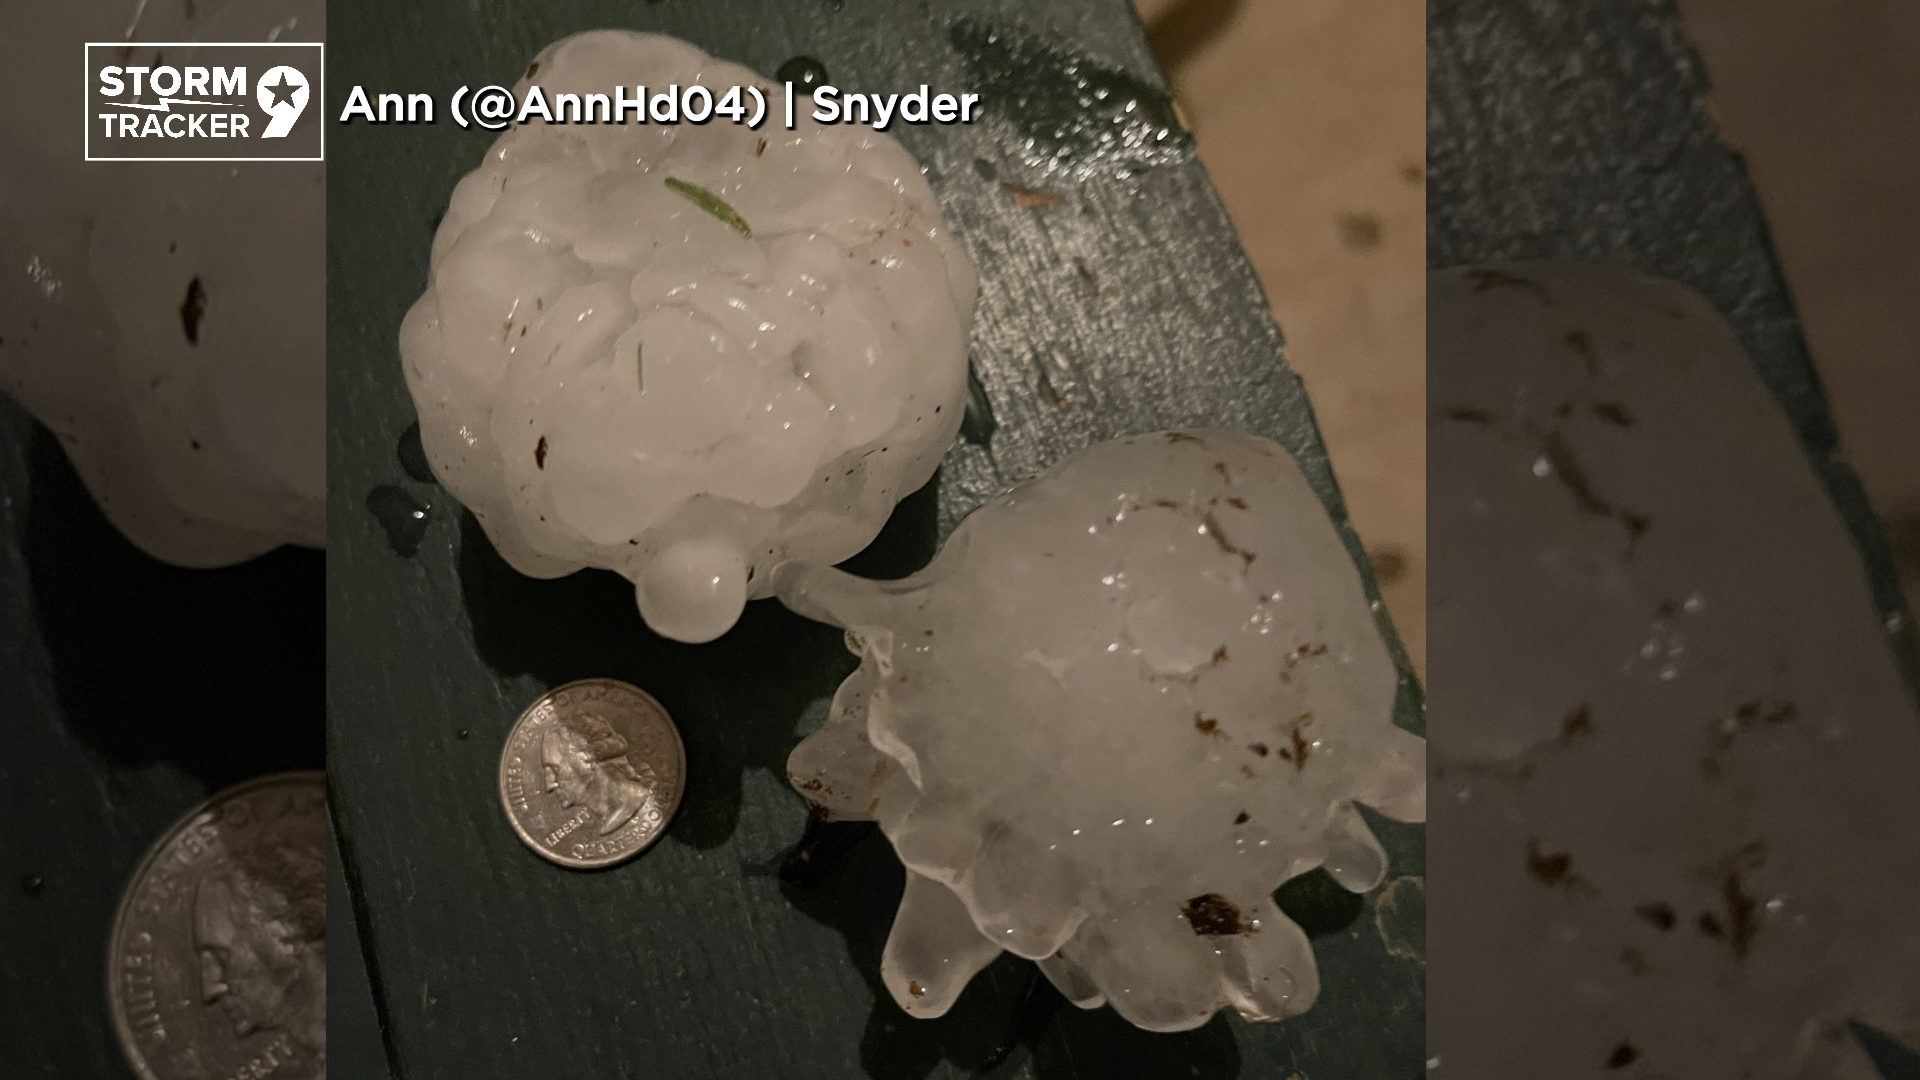 Why is hail such a prevalent part of severe weather in the region?